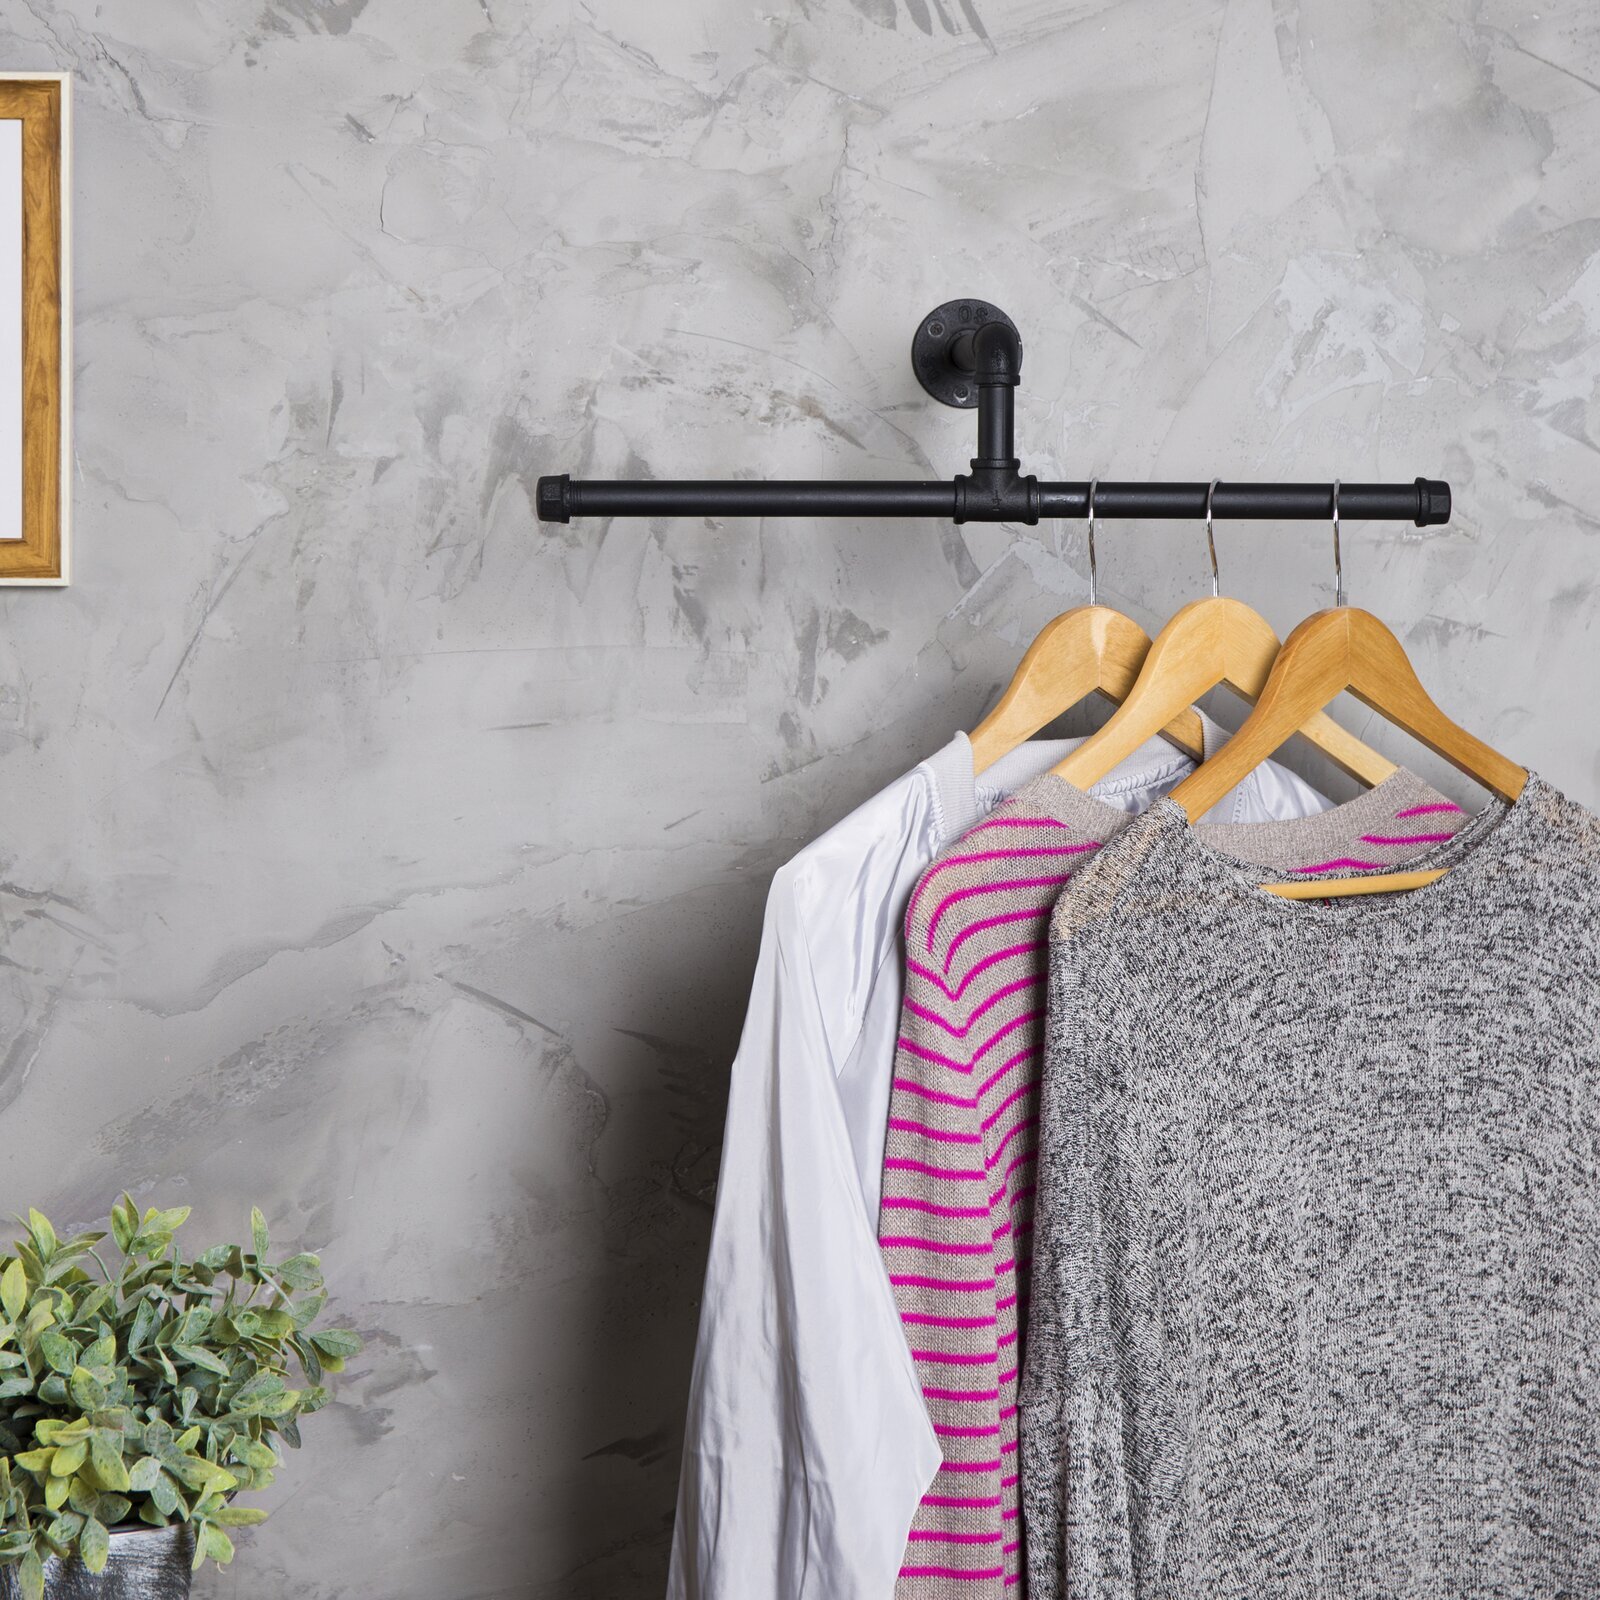 More minimalist wall clothes hanger